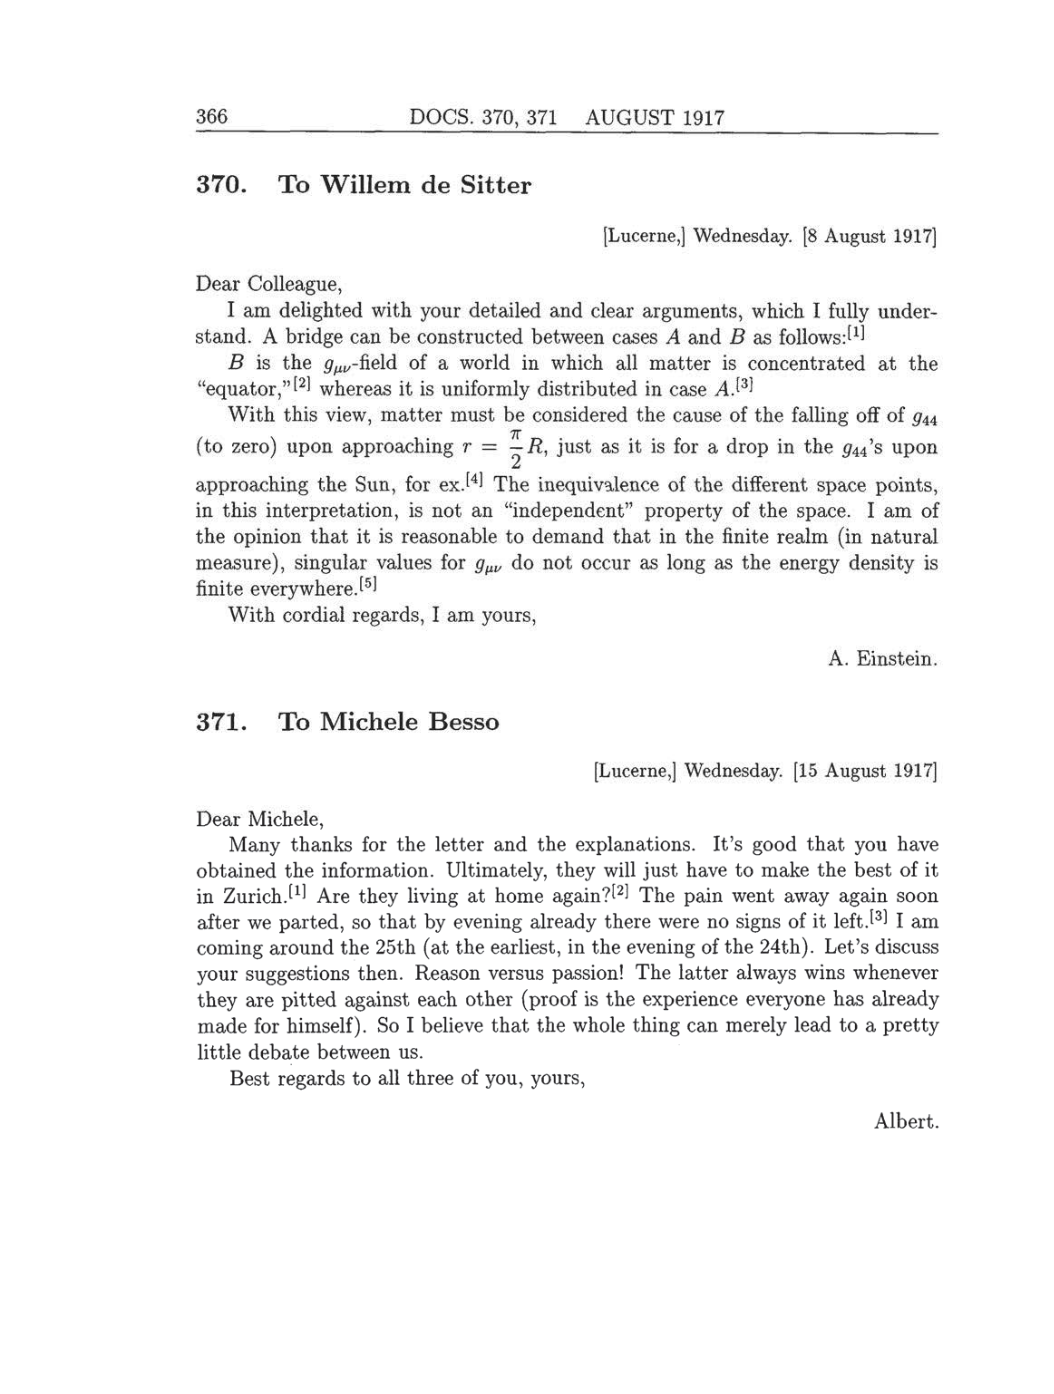 Volume 8: The Berlin Years: Correspondence, 1914-1918 (English translation supplement) page 366